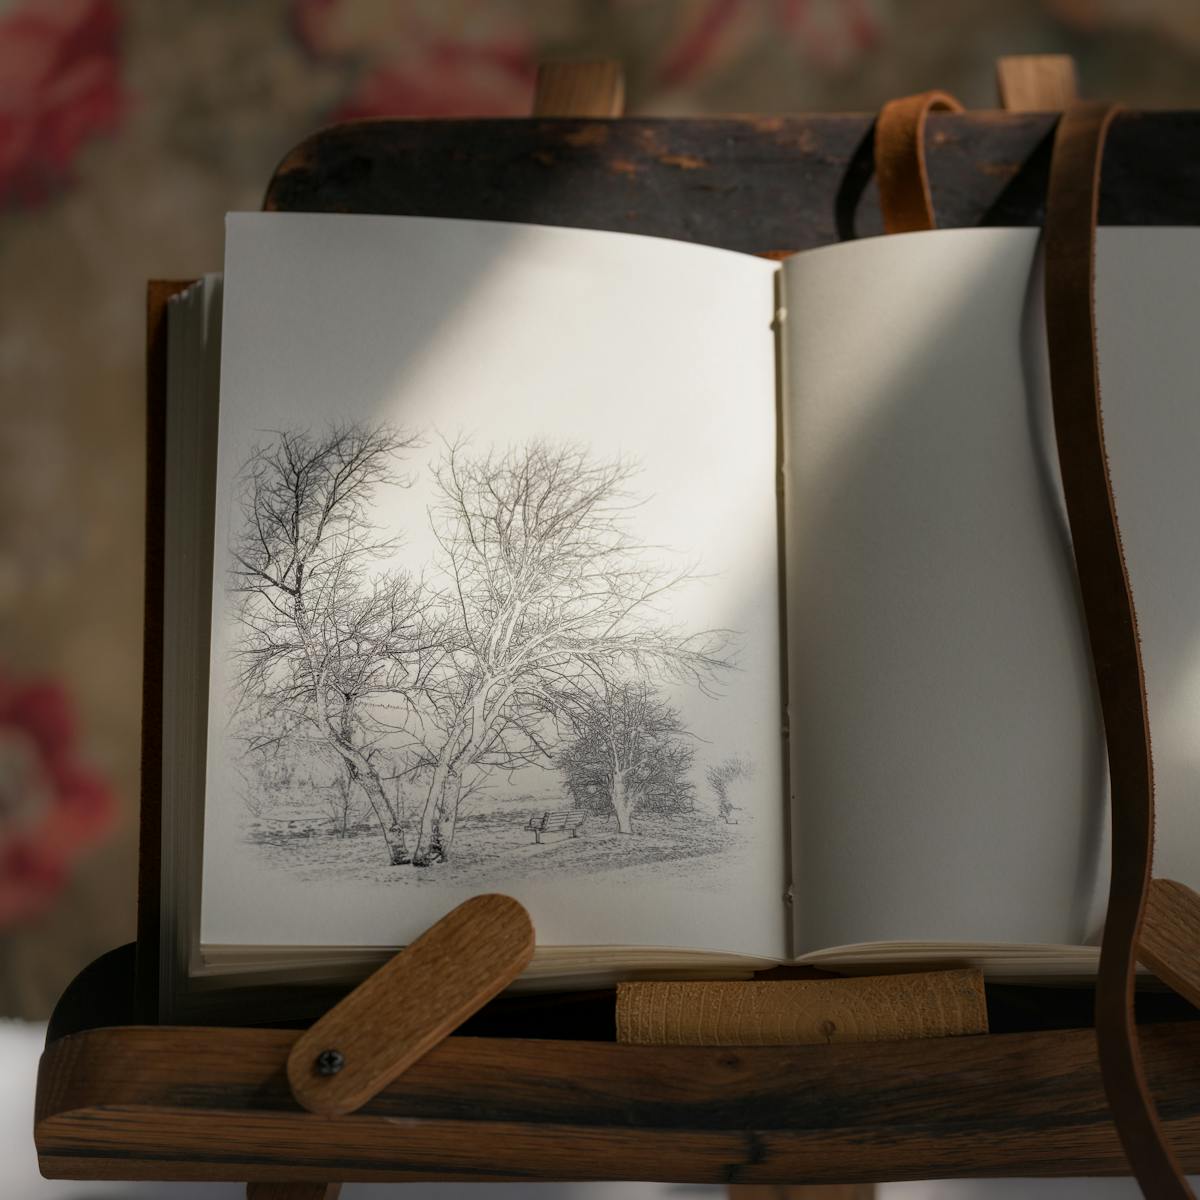 Photograph of a notebook on a wooden book stand, lit by a window from the right, casting a shadow on half of the page. On the left page there is a sketch of a landscape with trees and a bench. To the right of the book a single tulip in a small glass vase. 